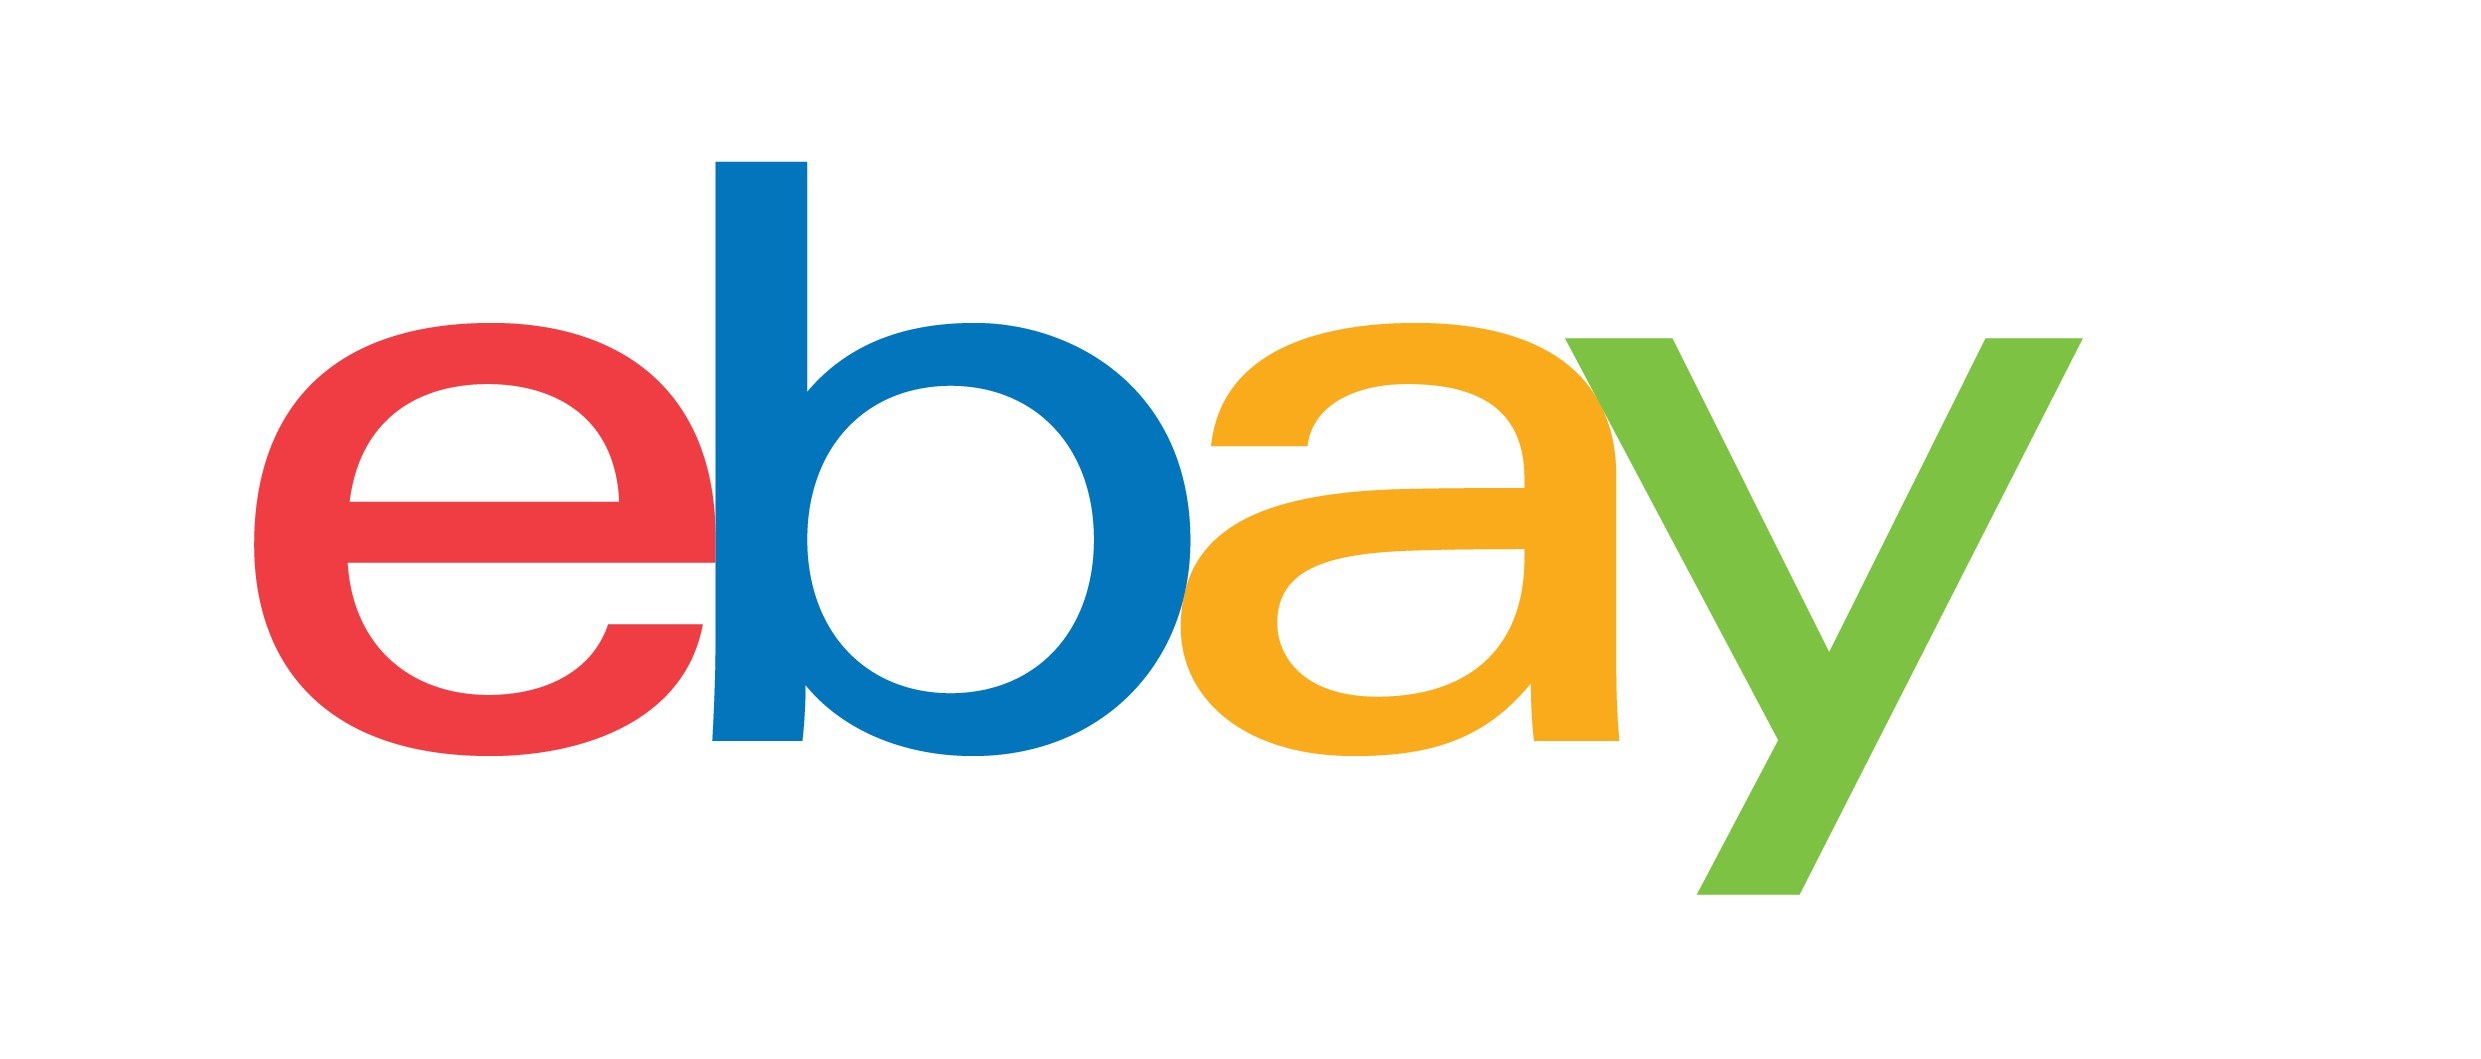 New Deal: EBay To Gain $2.2 Billion From Sale Of Adevinta Shares